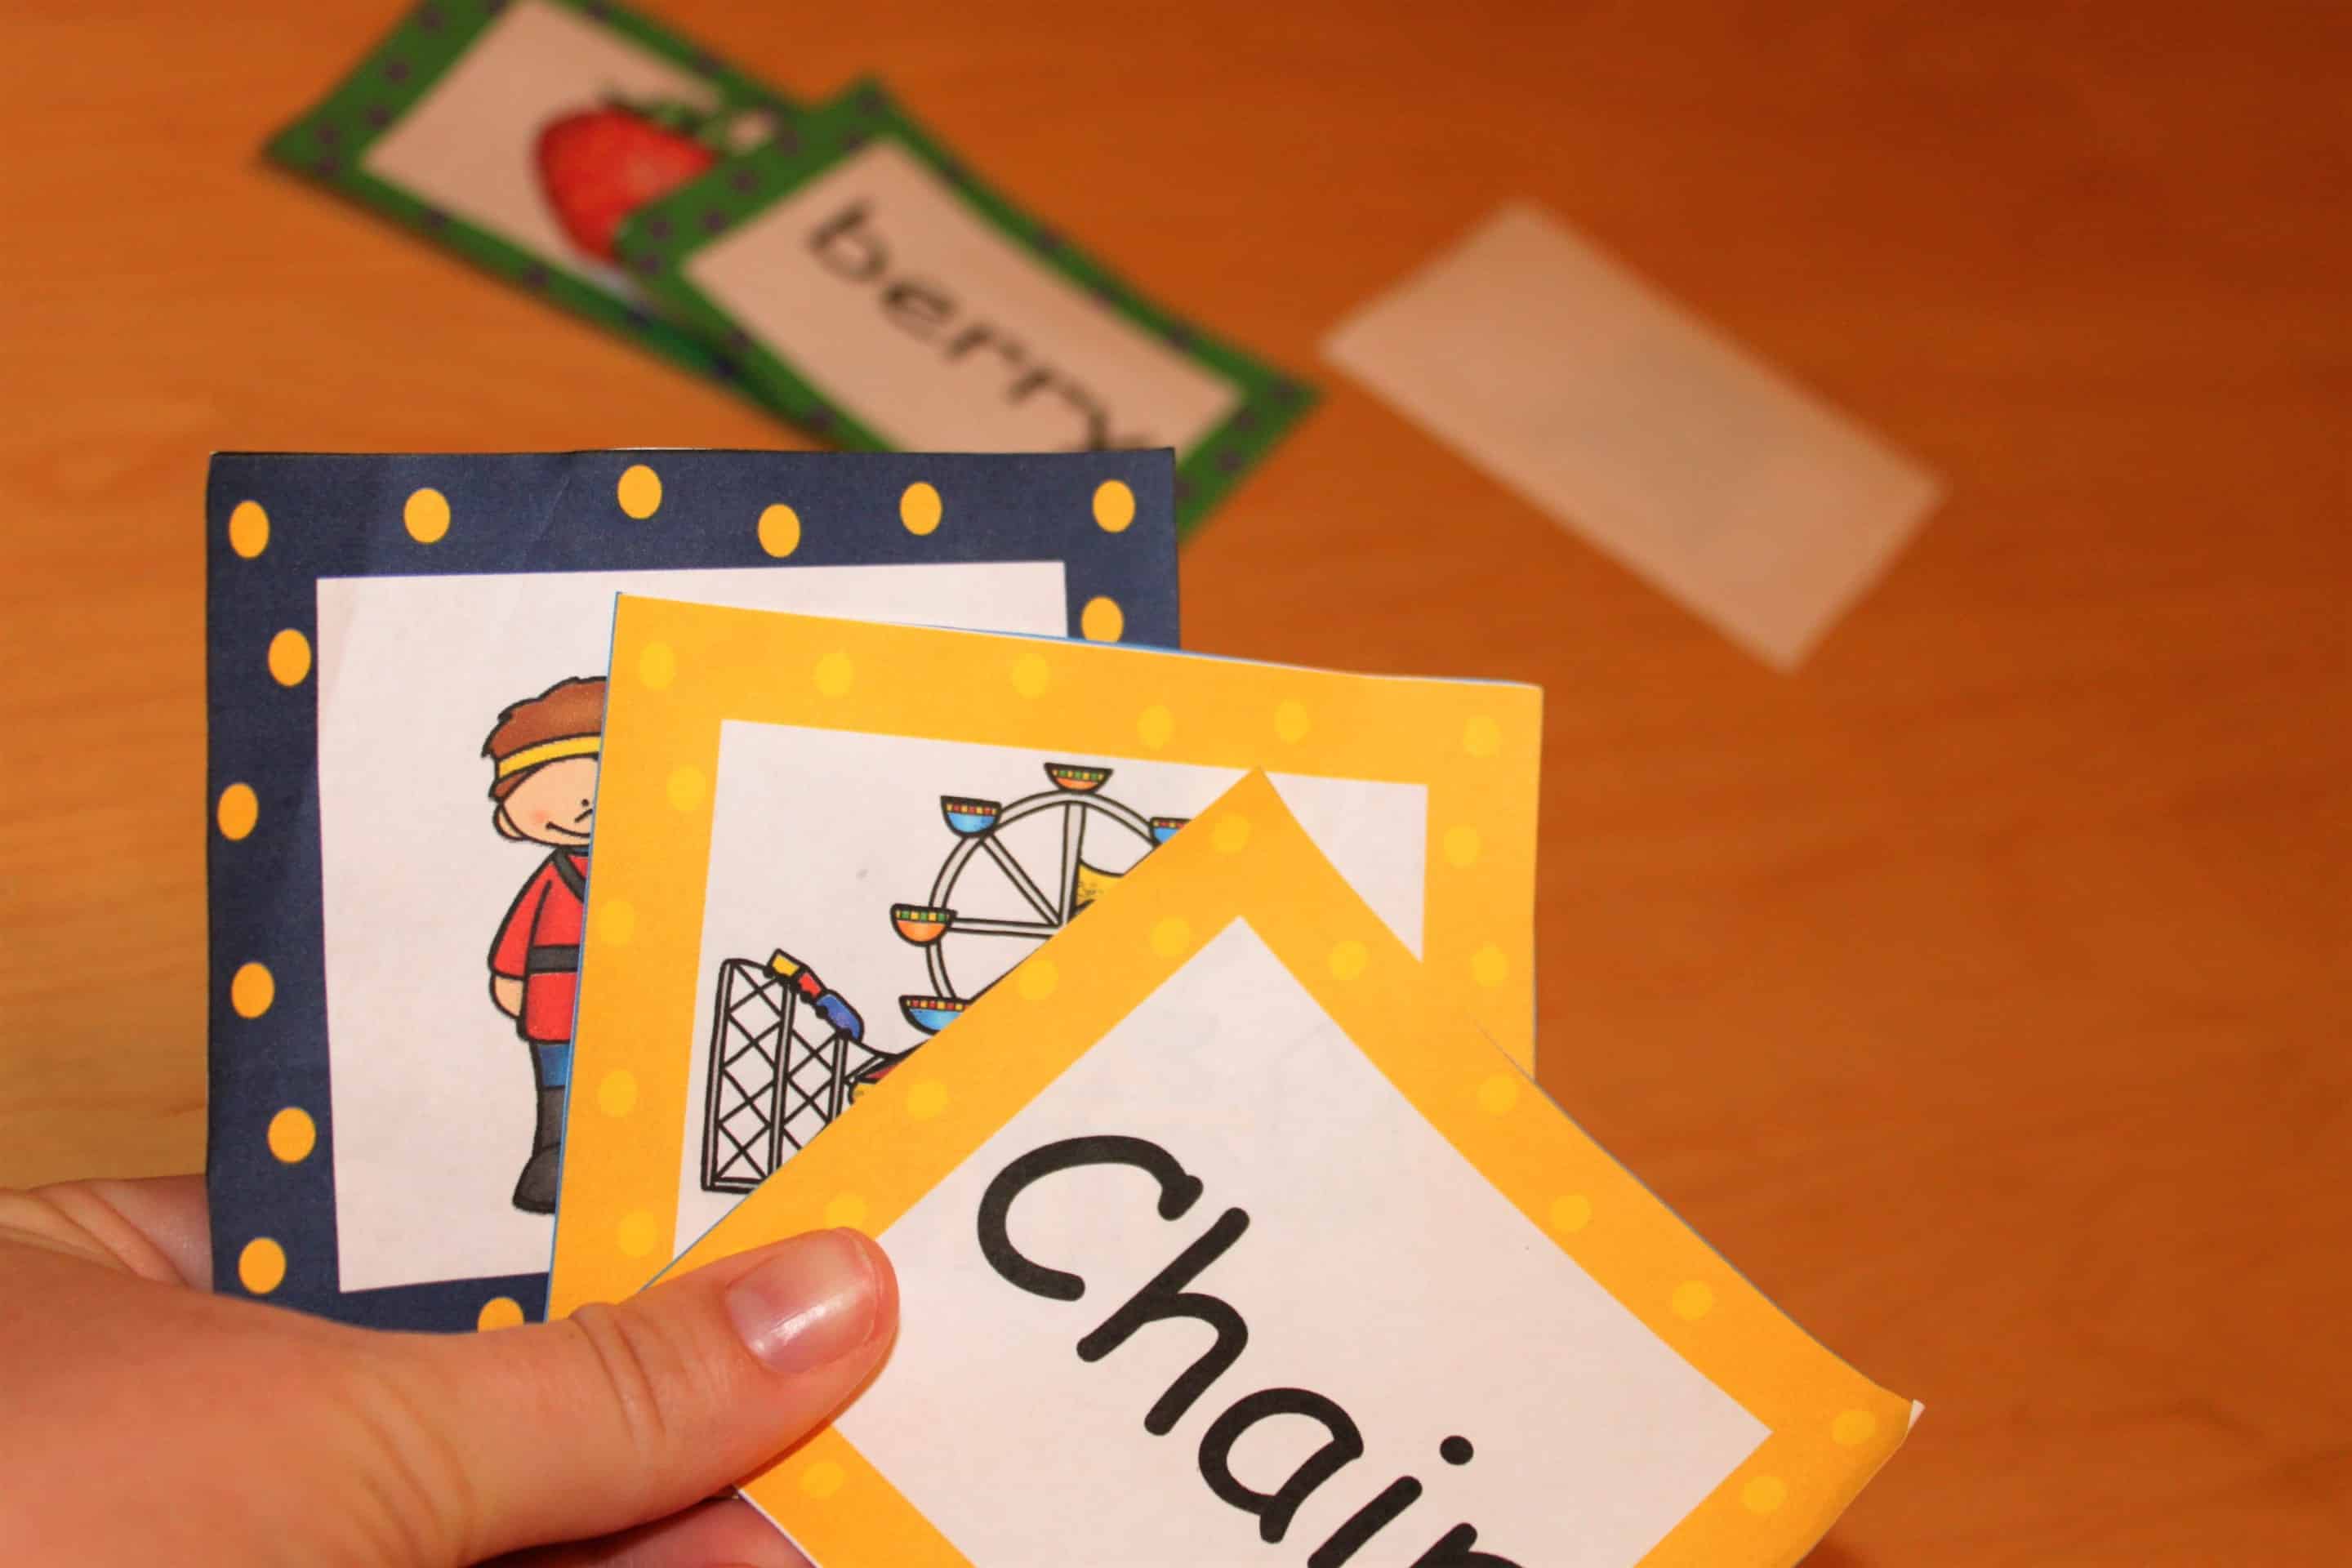 child learning air eir and err words by playing a phonics game